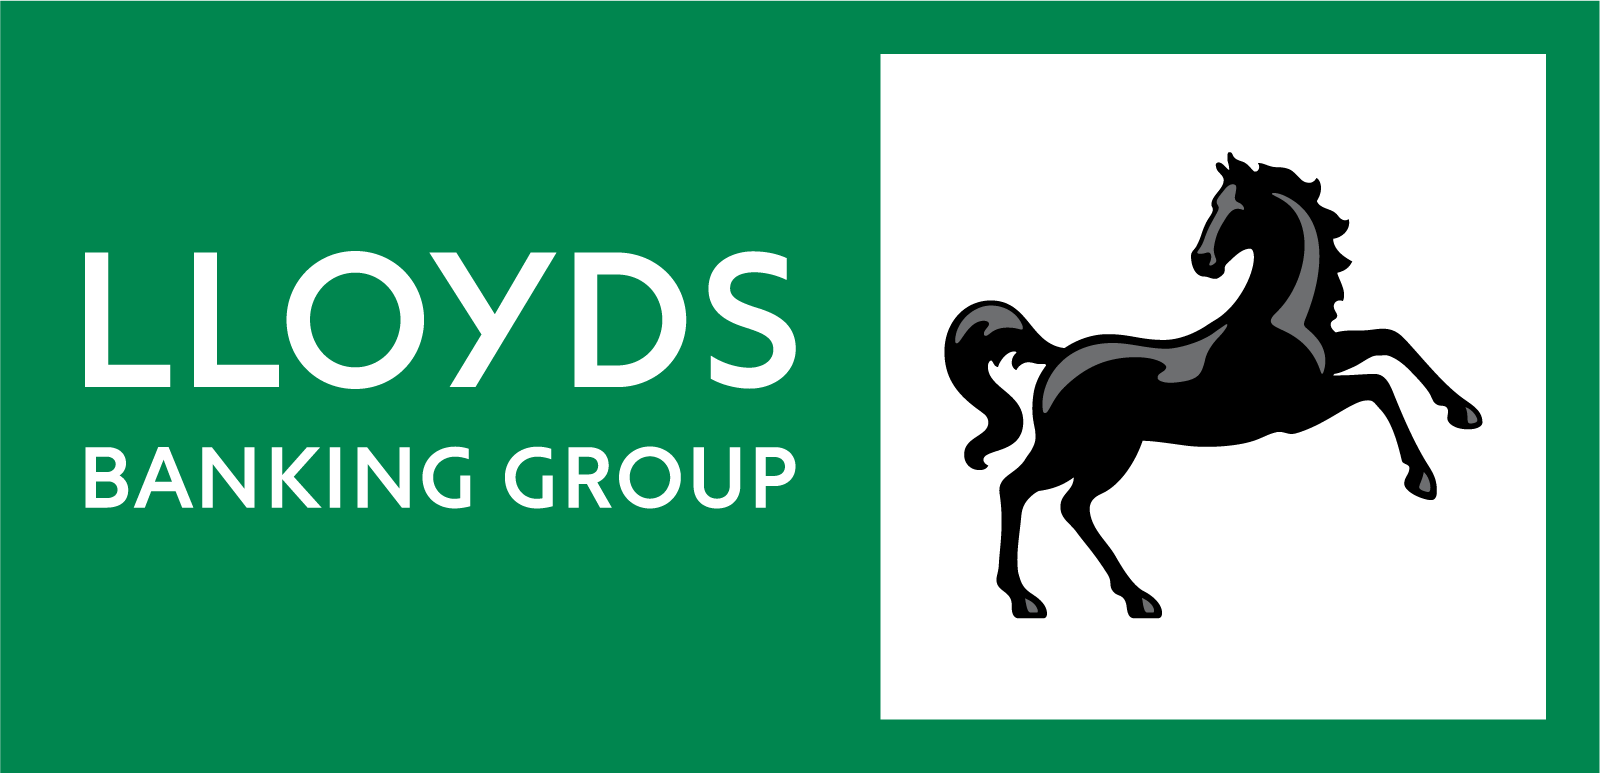 Thank you to our sponsors, Lloyds Banking Group